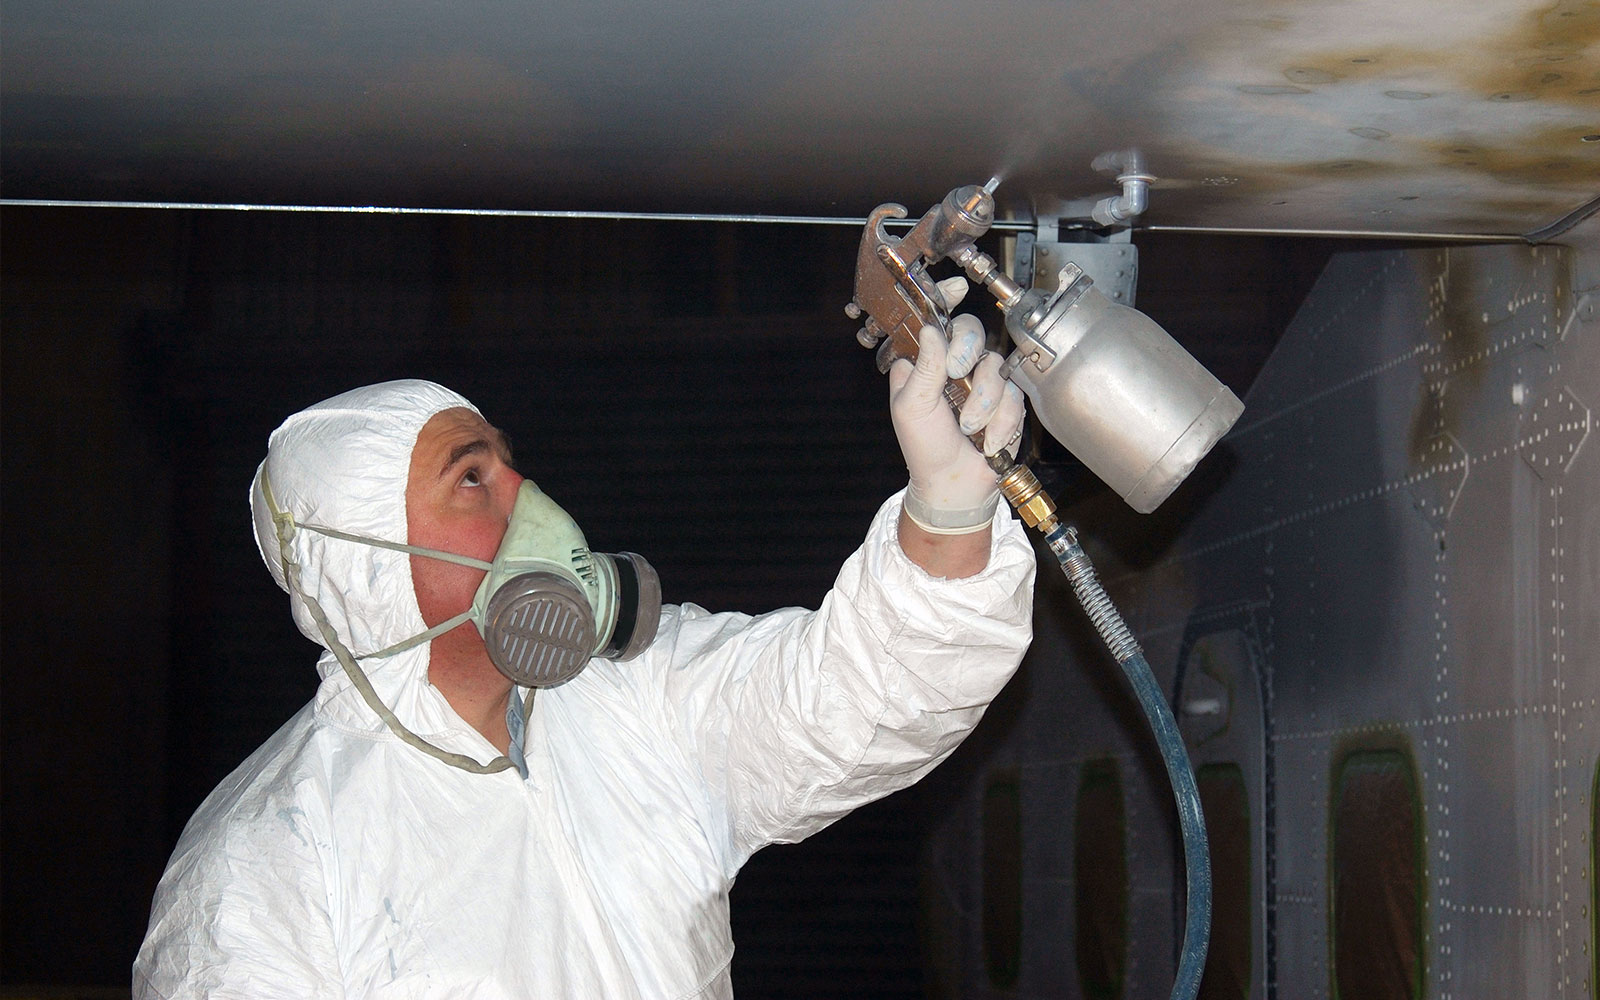 Paint Booth Air Management